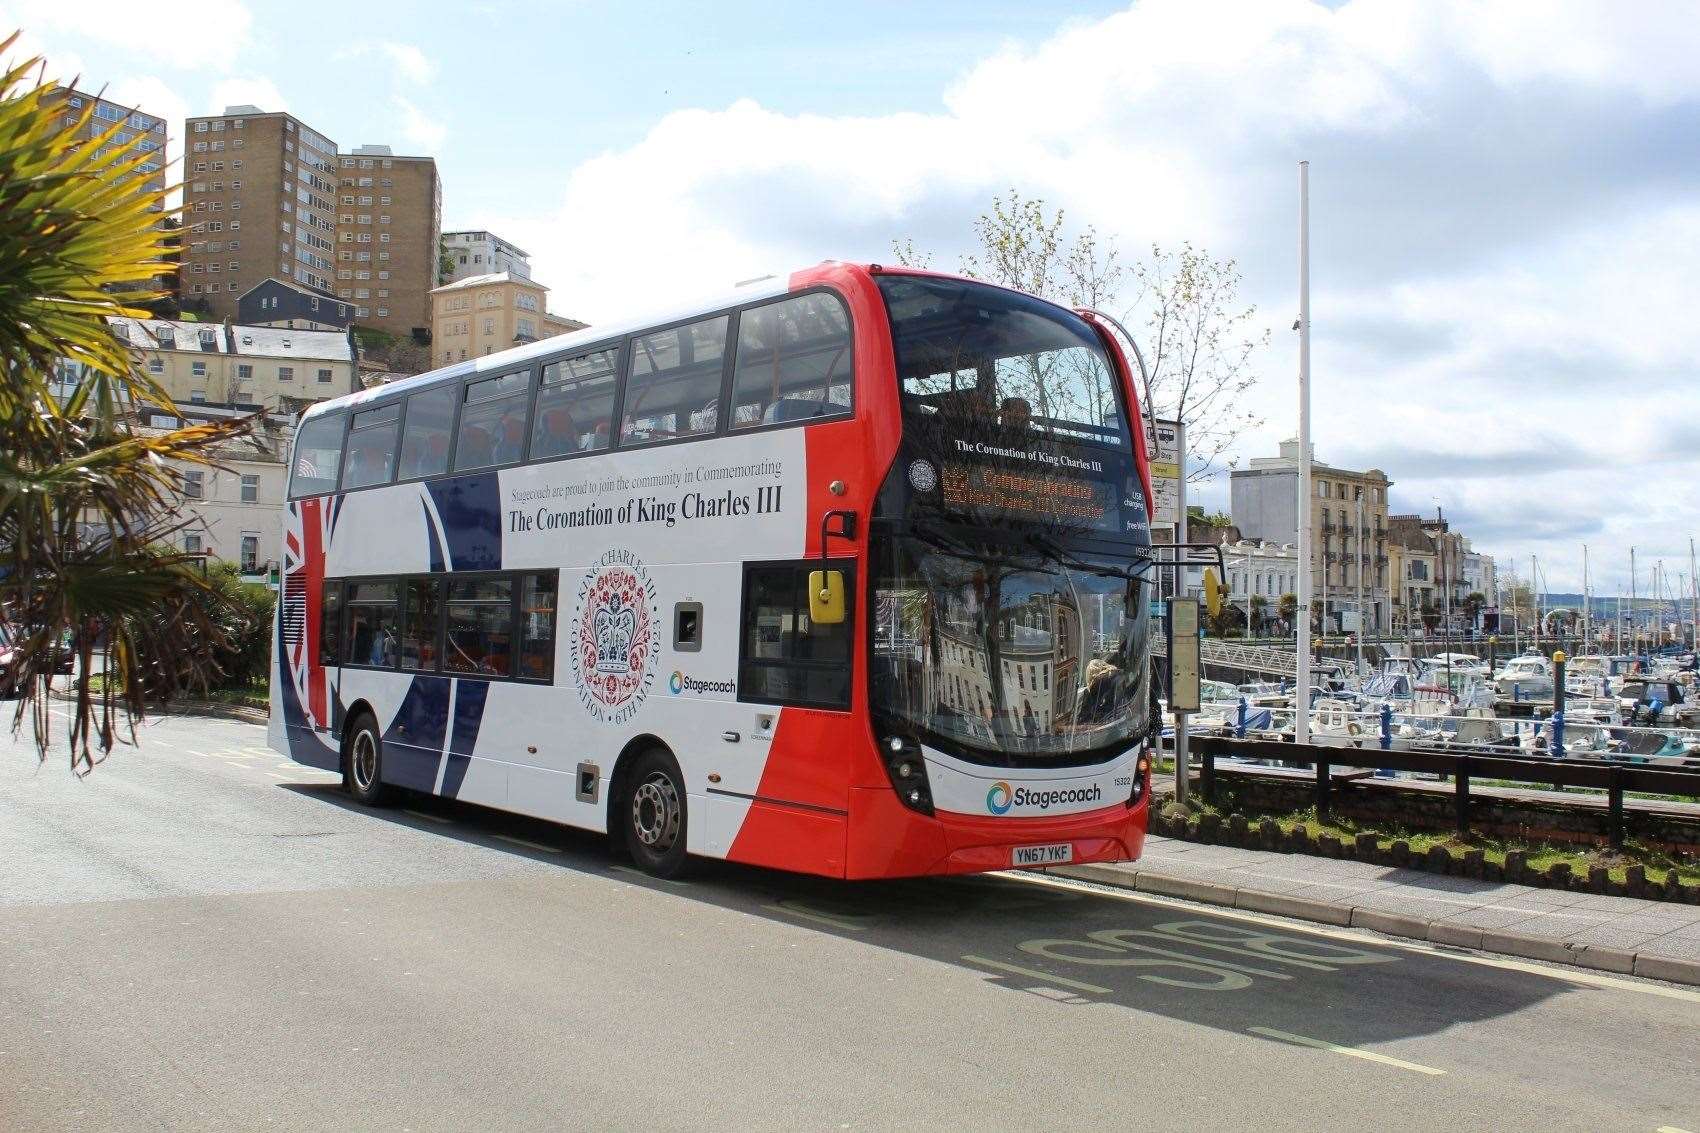 Stagecoach has seven buses featuring a bespoke Coronation design which will be in service.